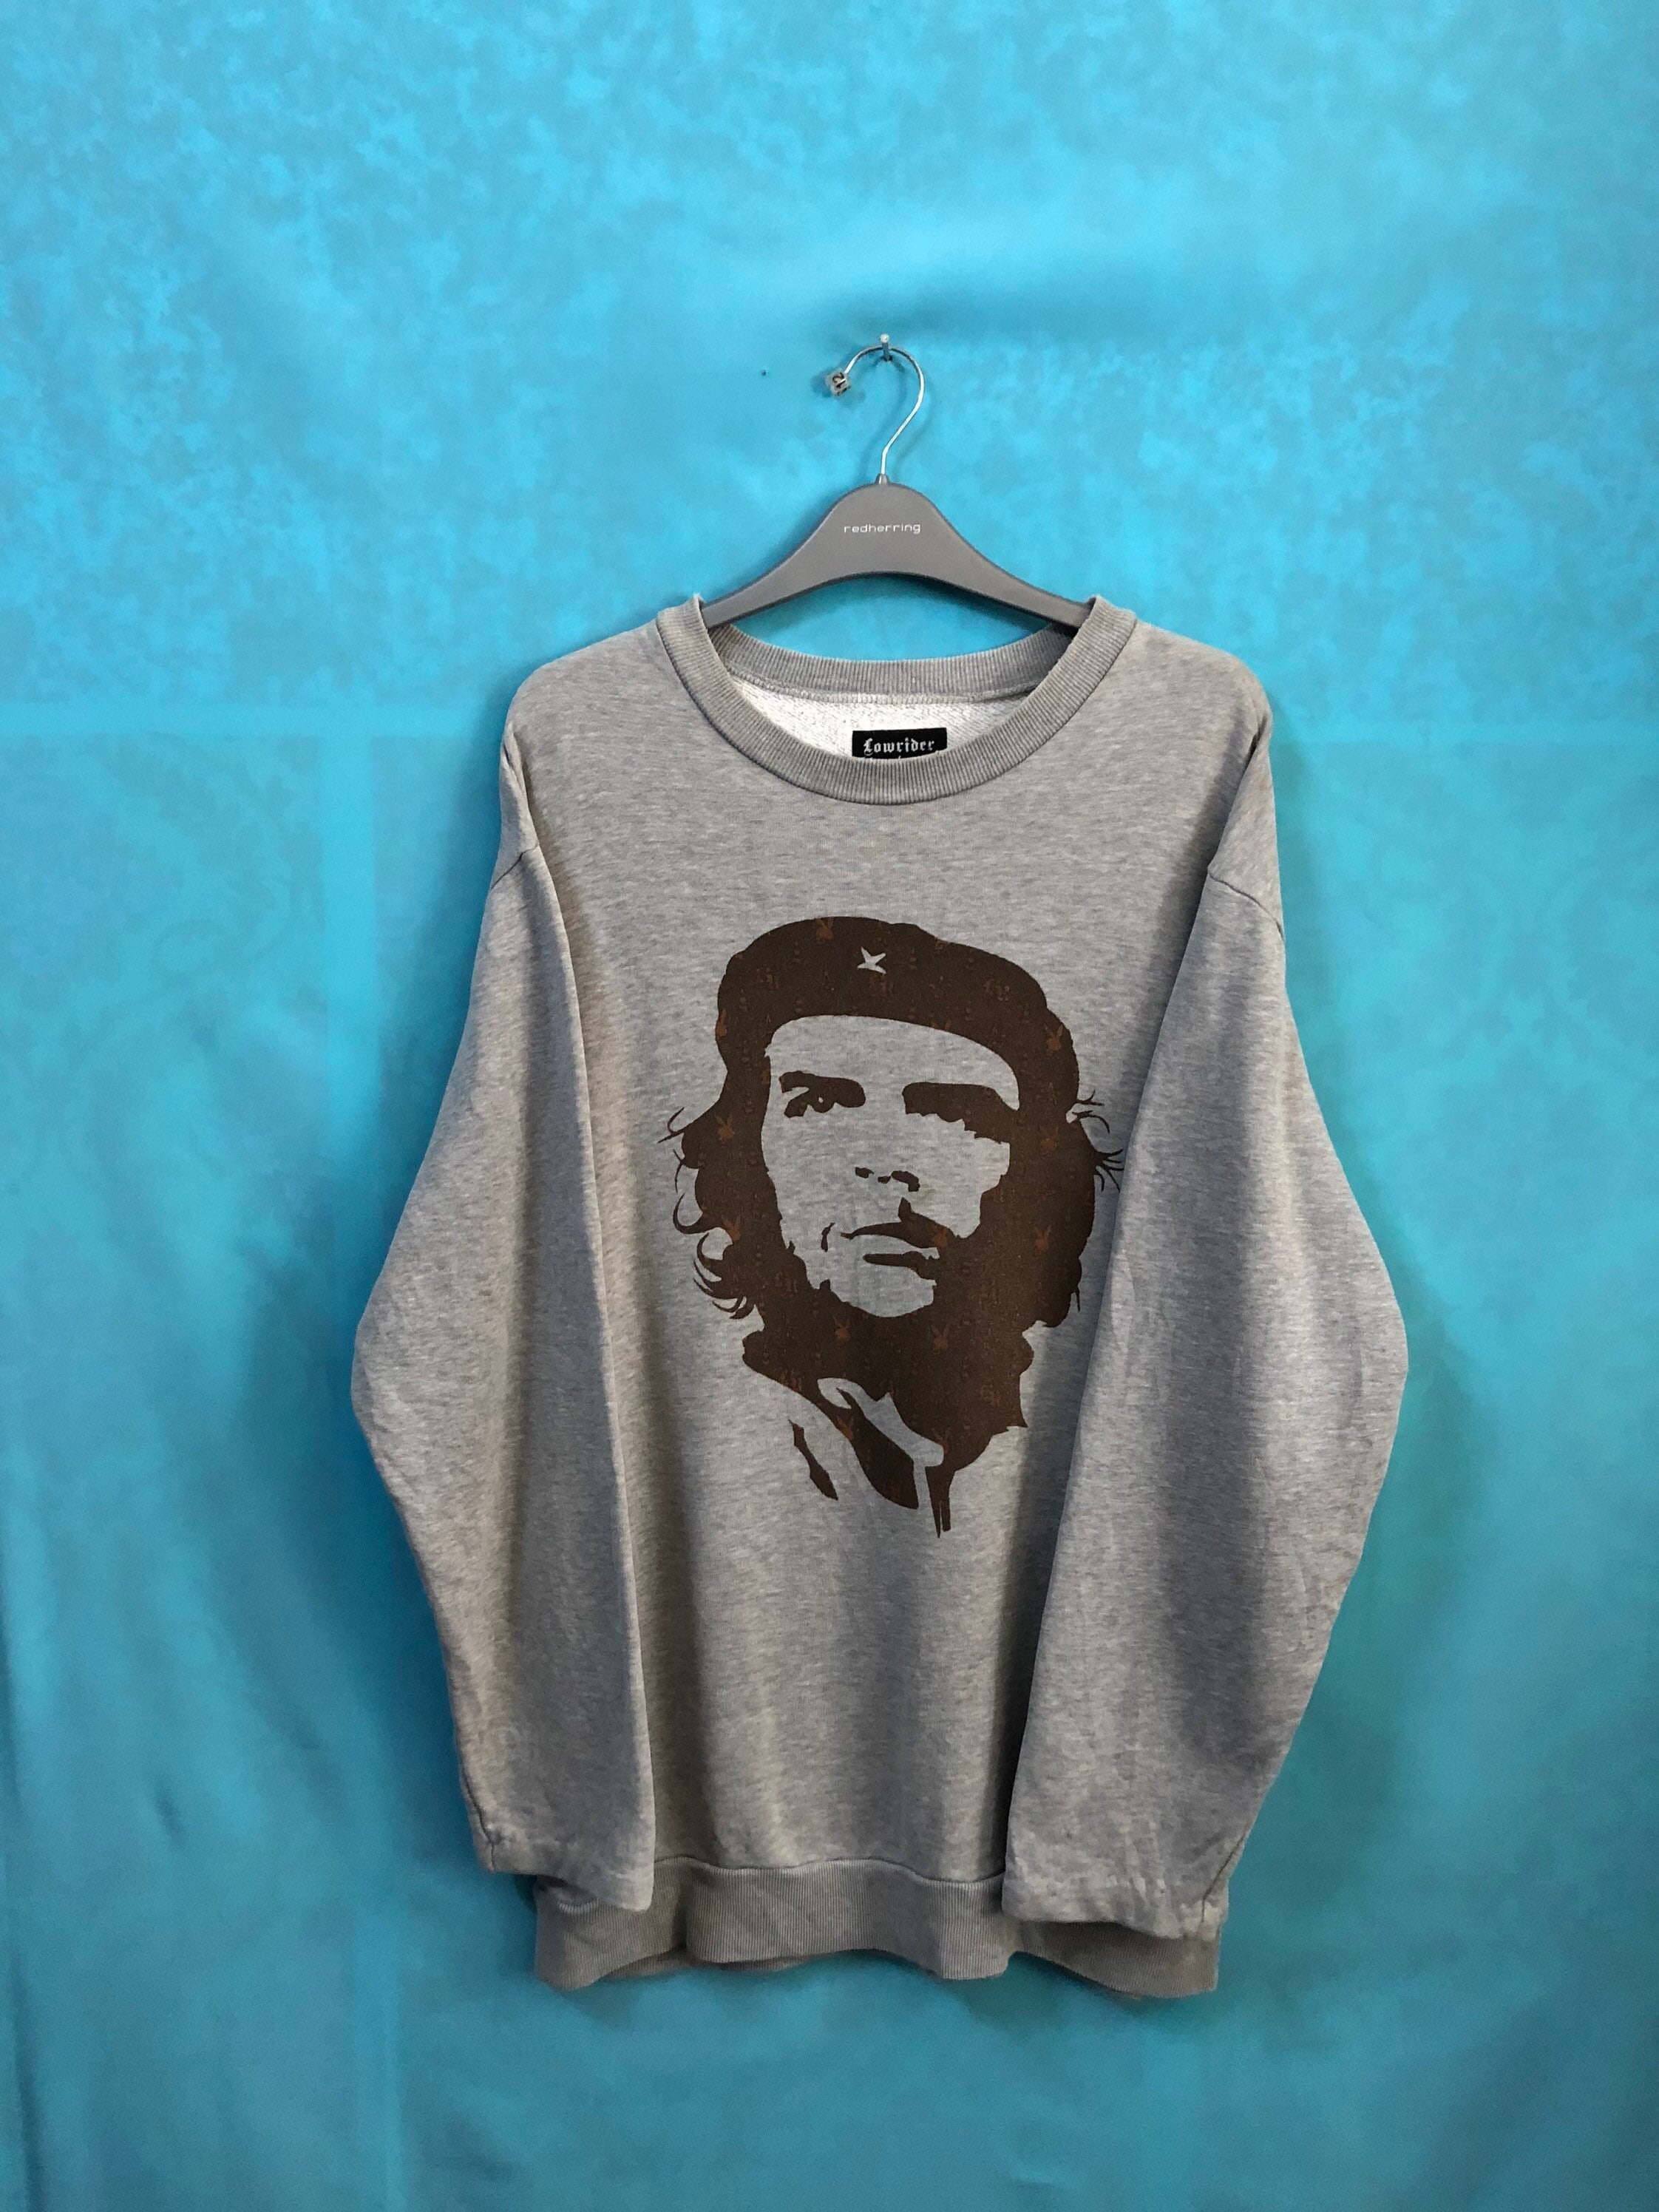 Che Guevara Socialism is for Figs shirt, hoodie, sweater and V-neck t-shirt